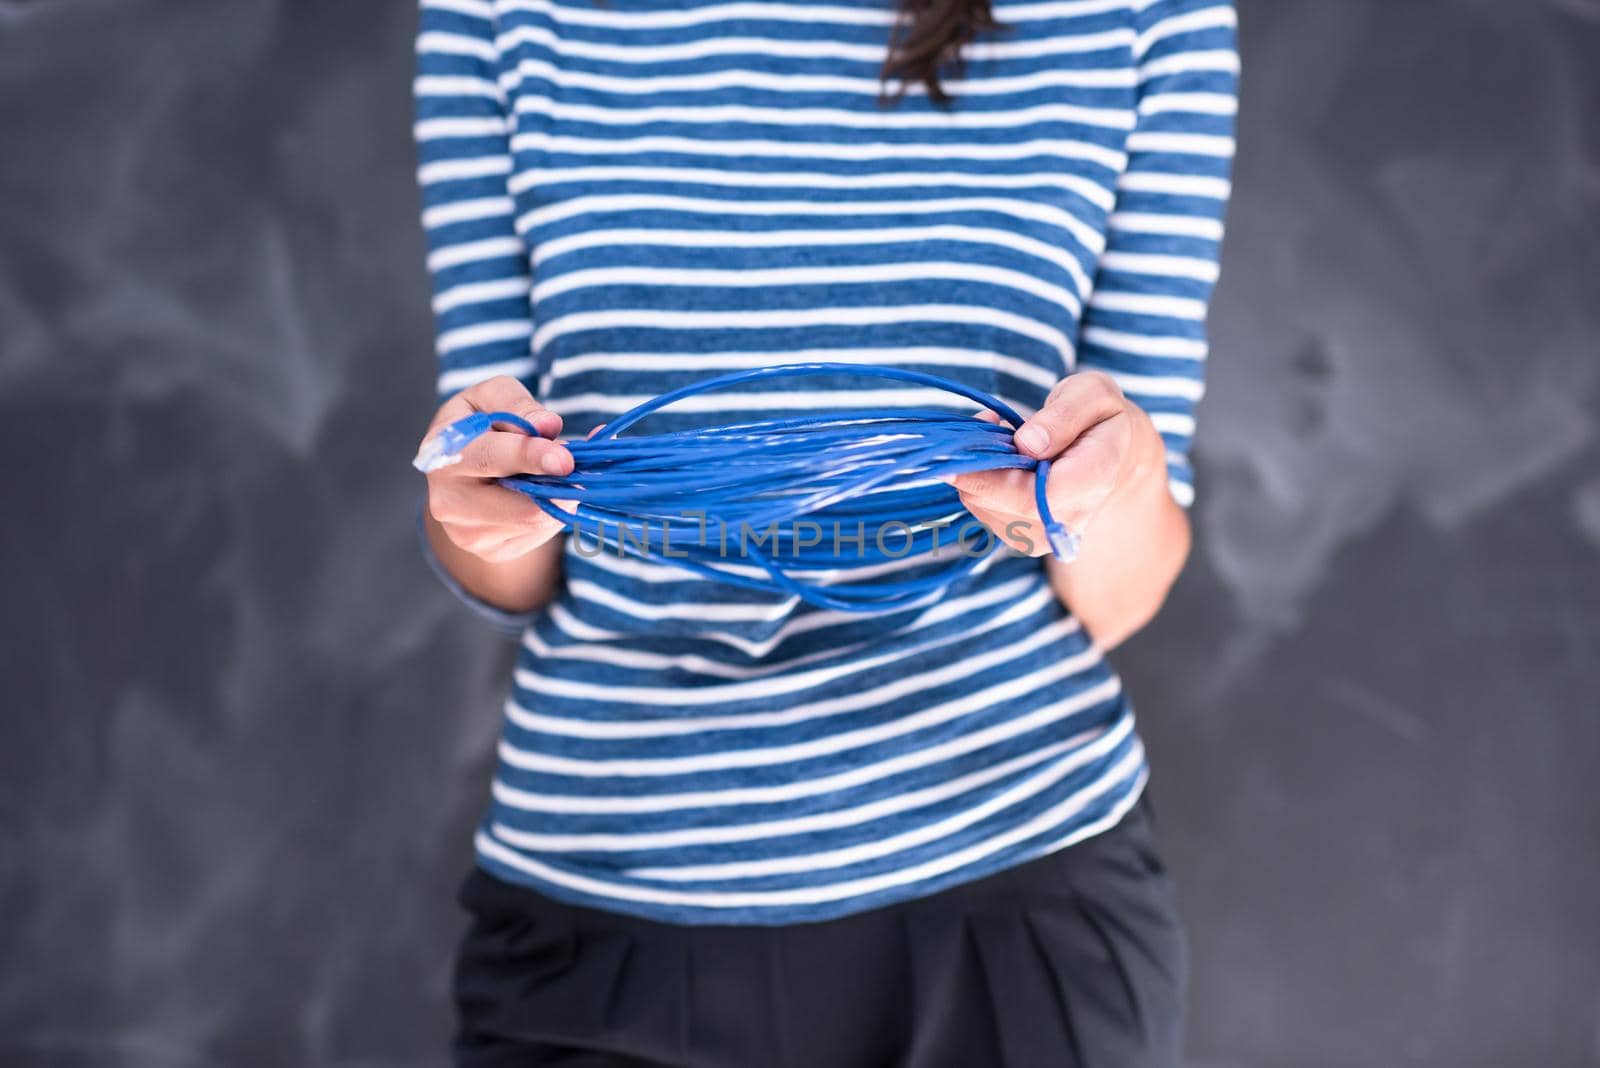 portrait of a young woman holding a internet cable in front of chalk drawing board